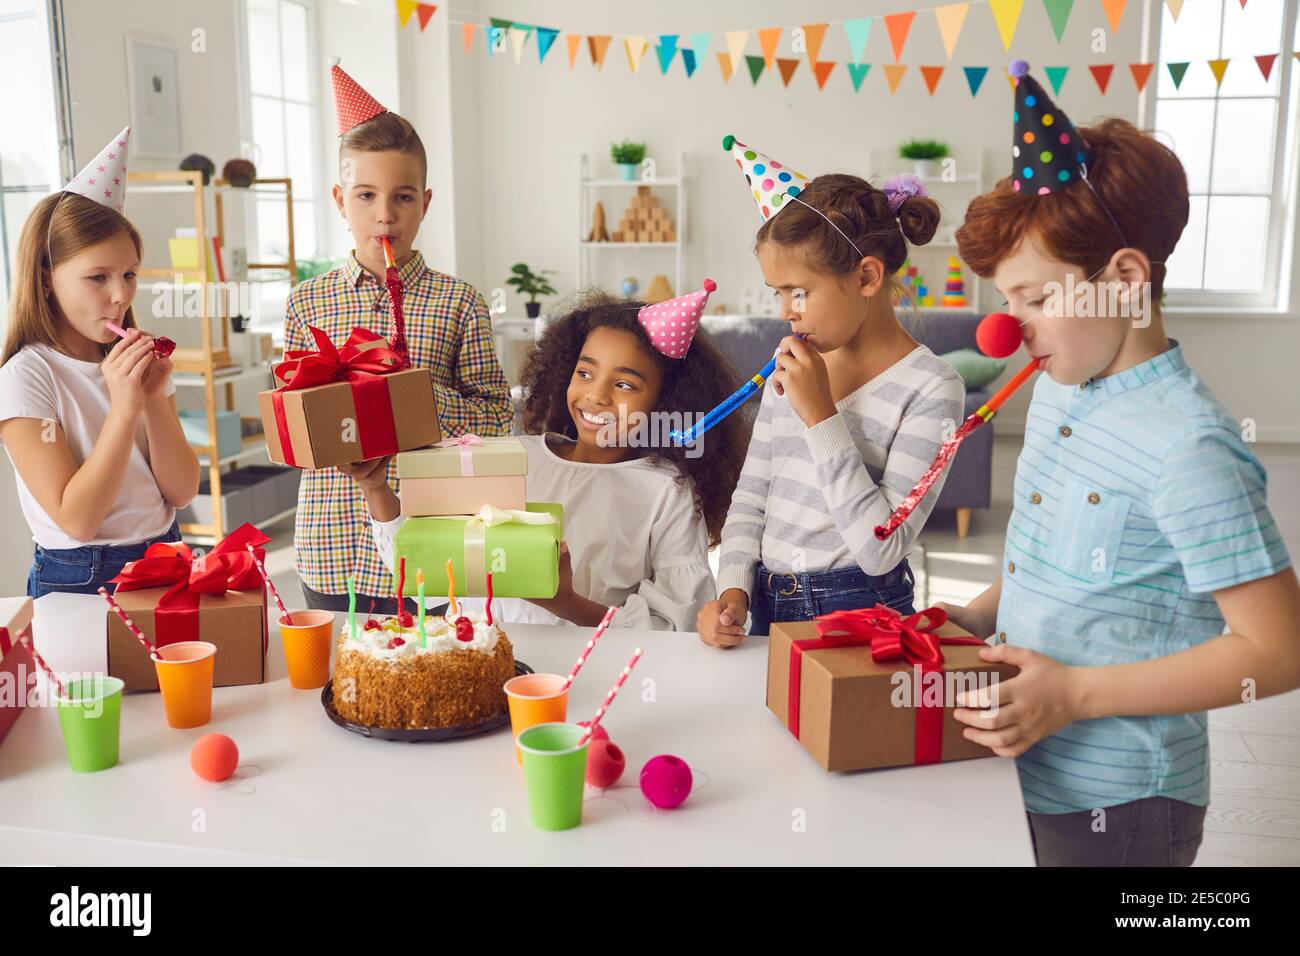 Group of smiling mixed race children with decorative whistles having birthday party Stock Photo